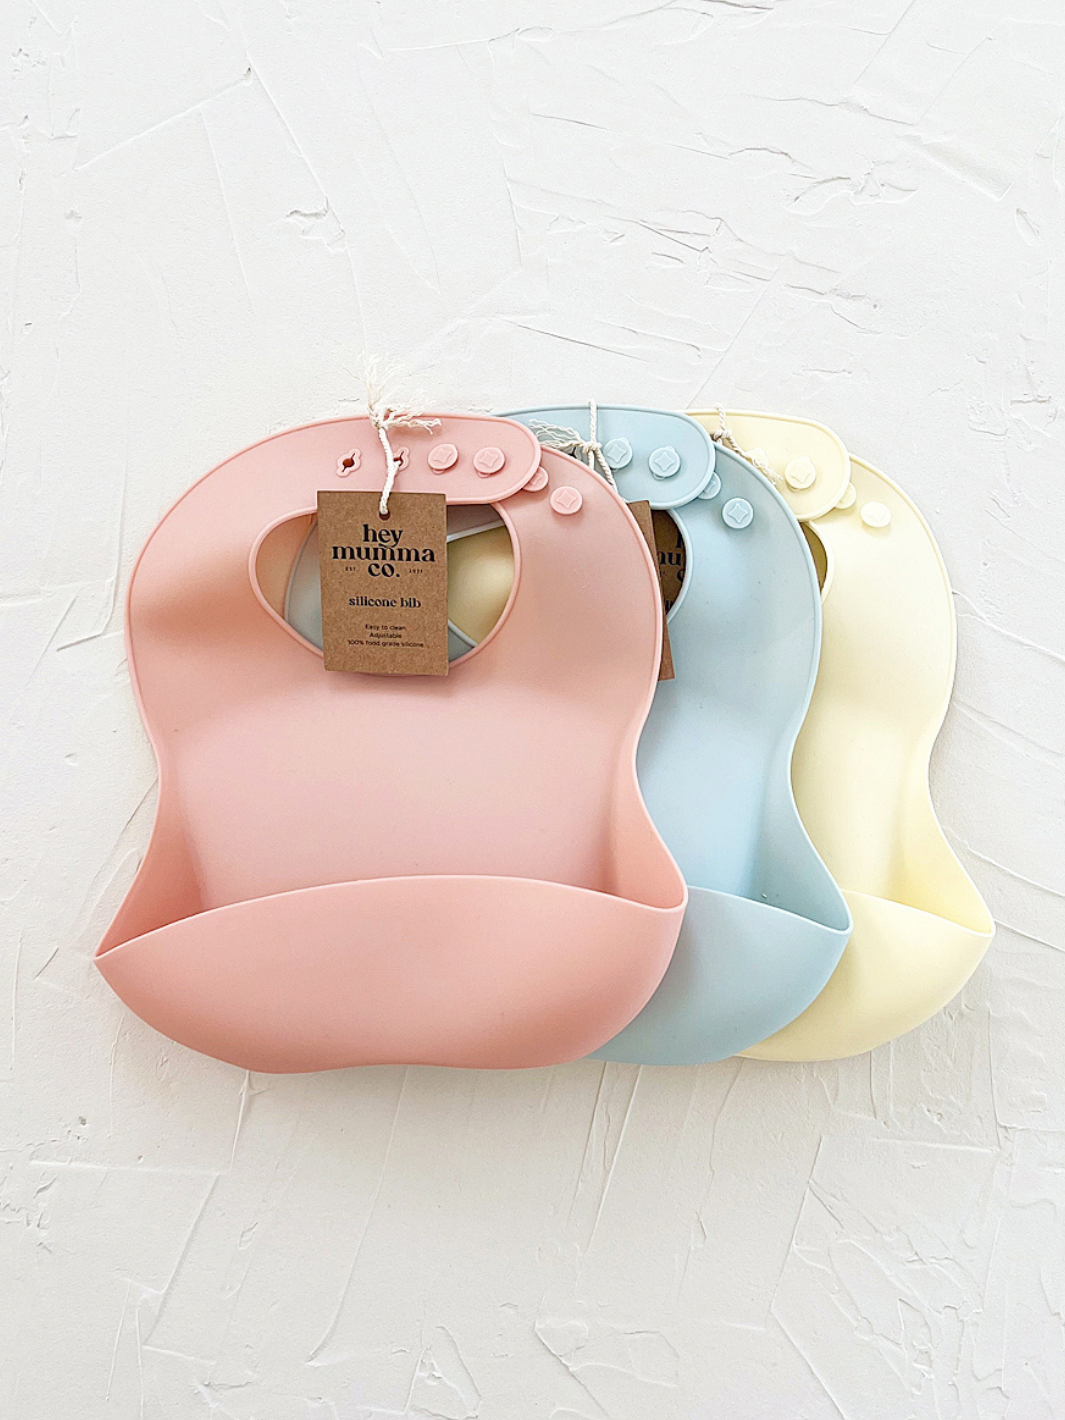 Silicone baby bib - 3 colours available with catch tray at the bottom. adjustable neck strap